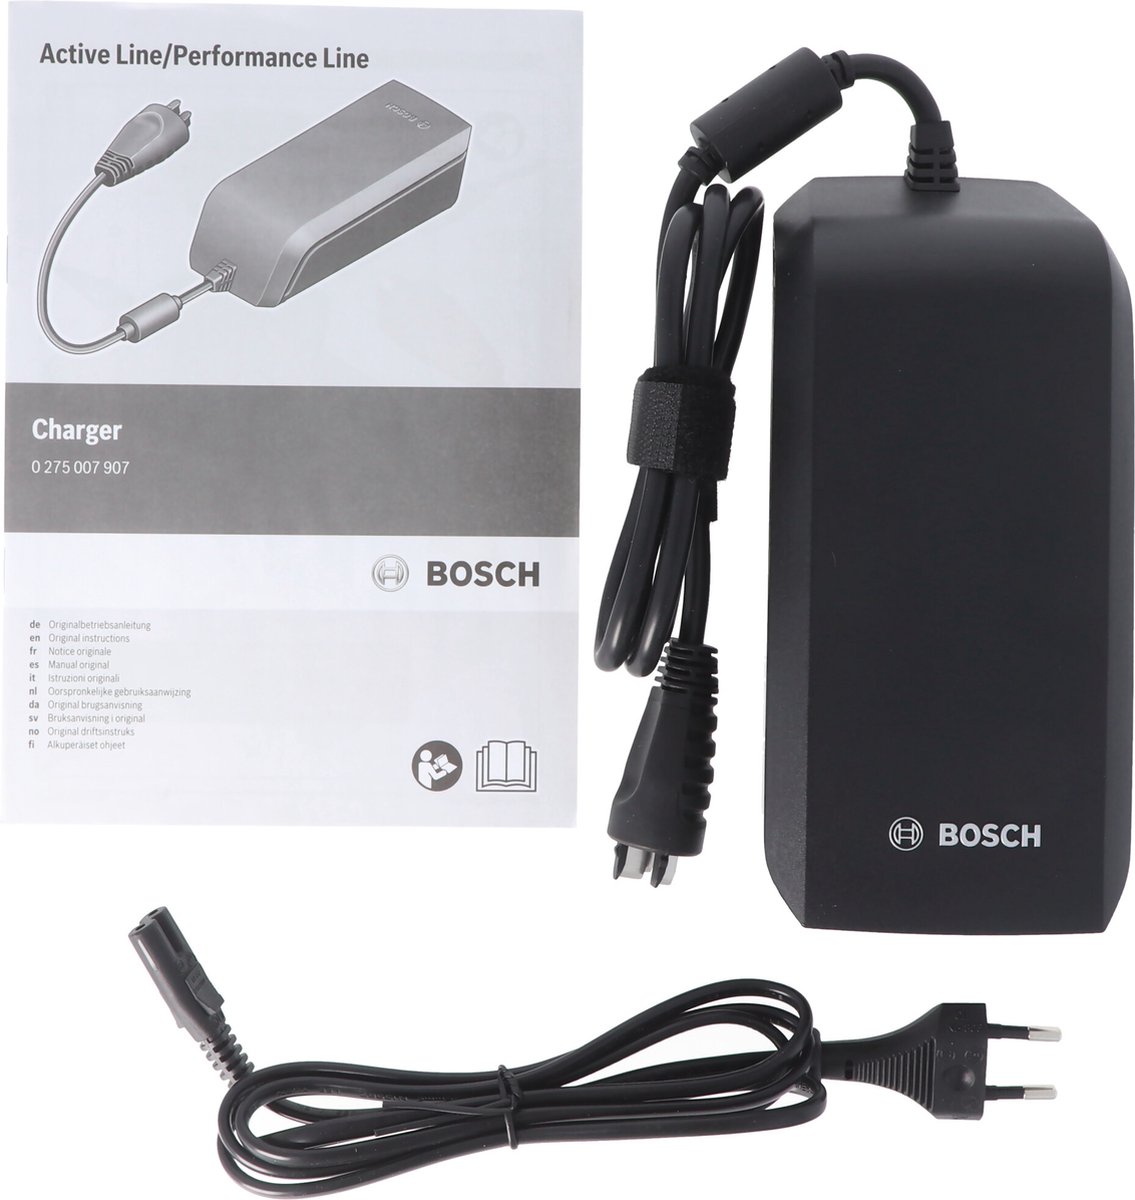 Bosch eBike - Chargeur Standard 4A Active / Performance